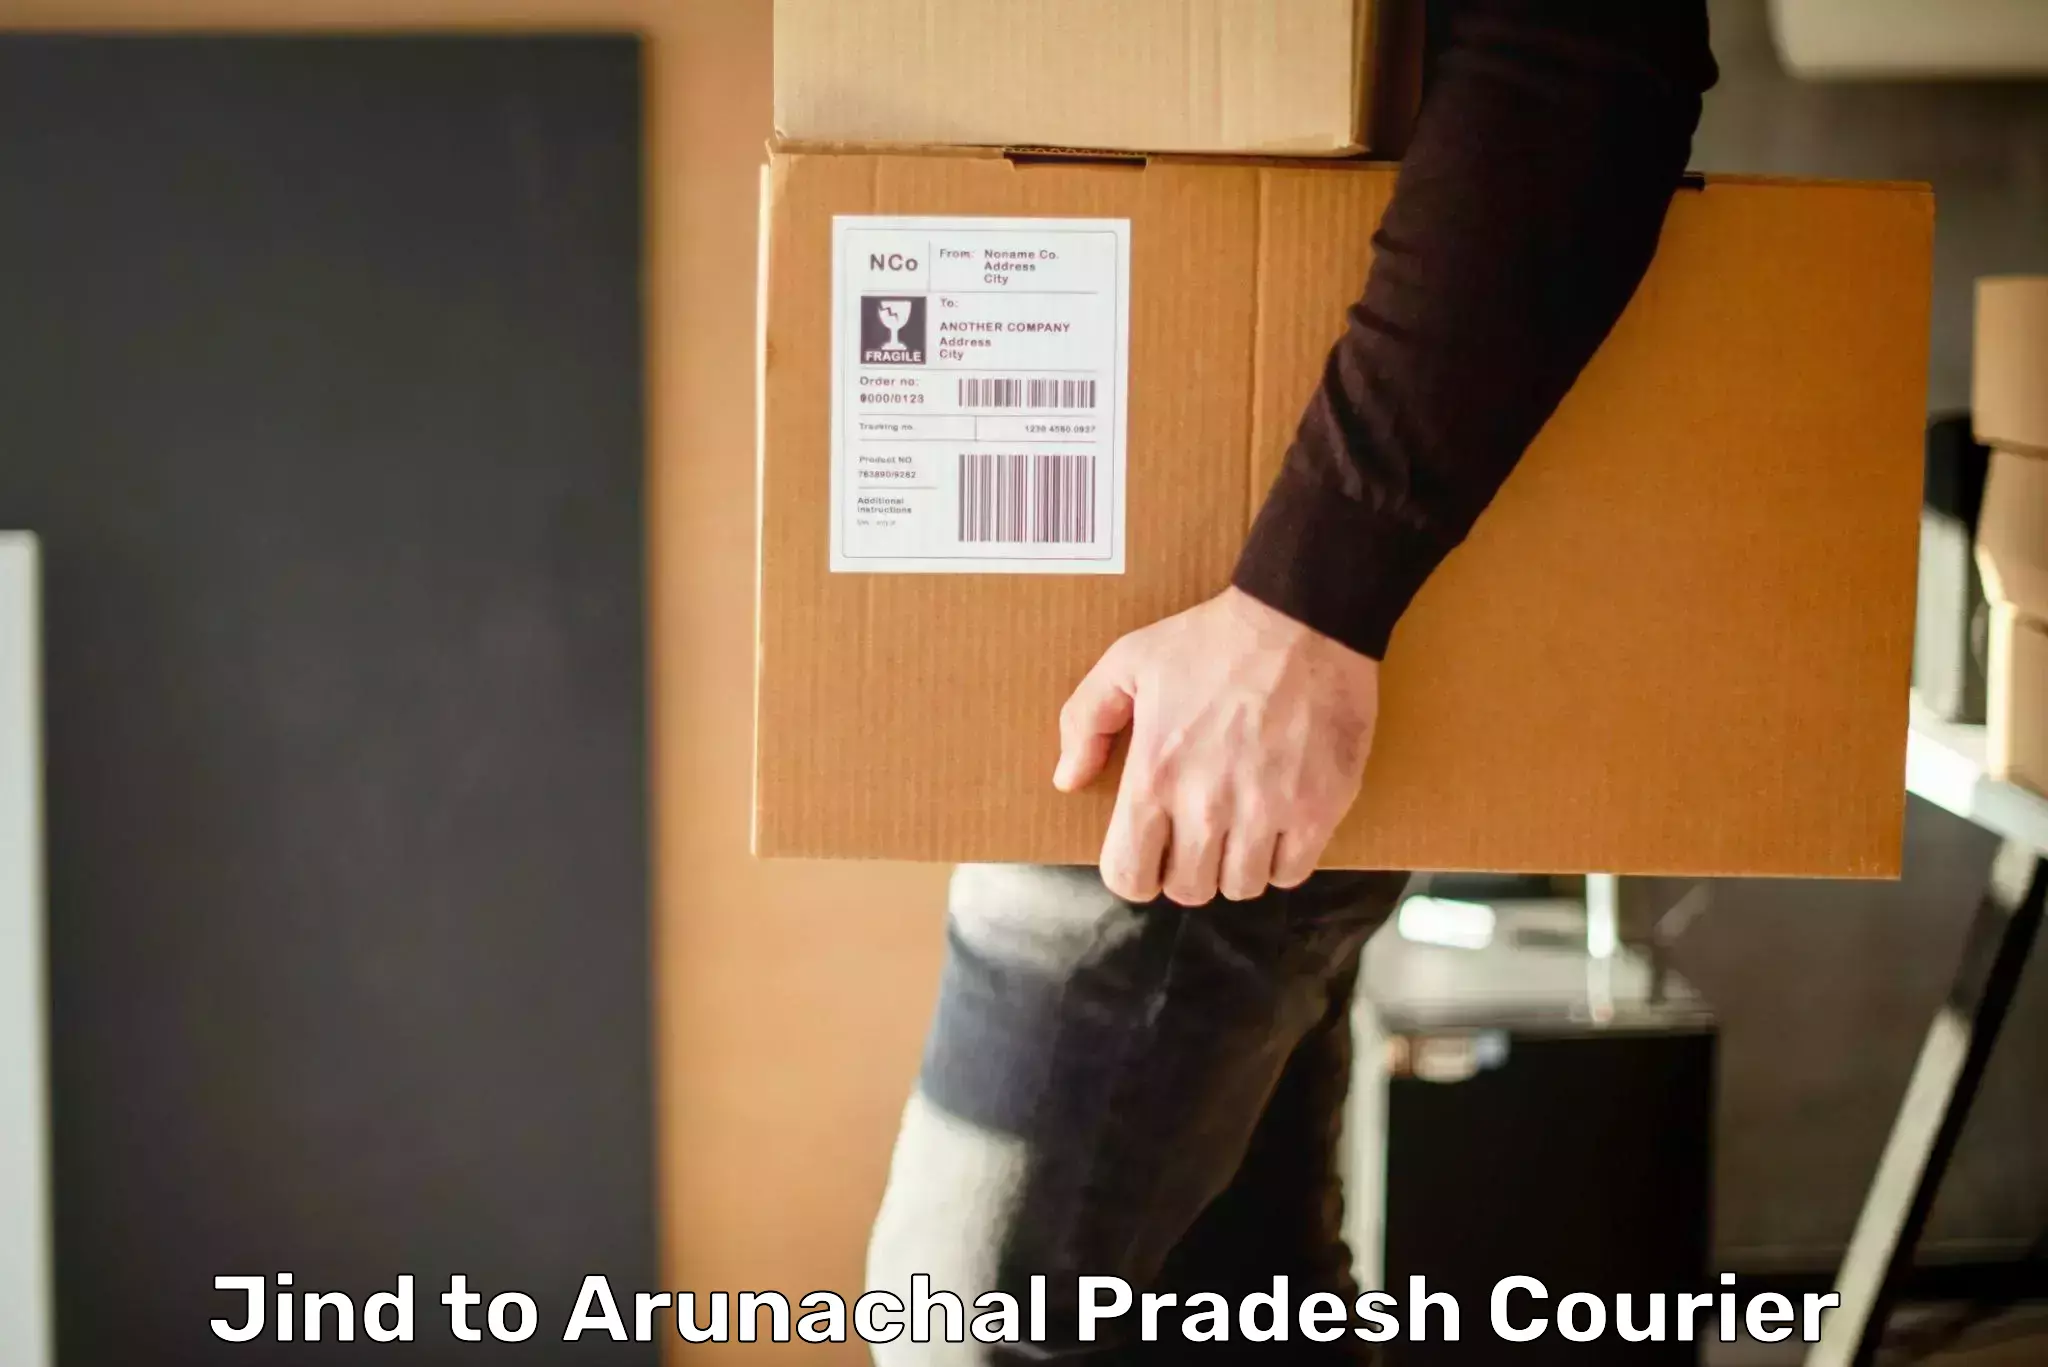 Custom courier packaging Jind to Lohit